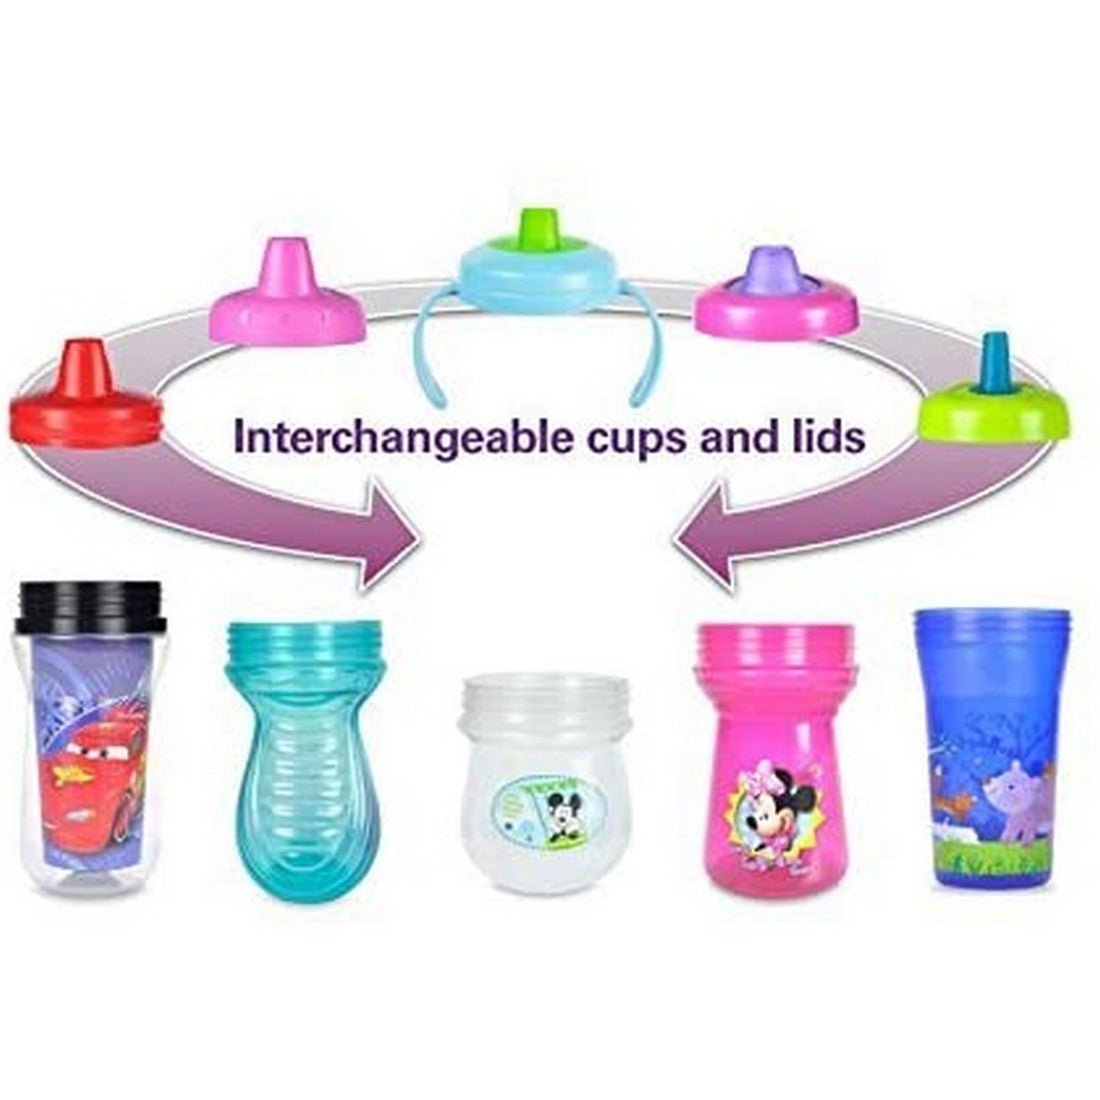 The First Years Ins Sippy Cup 2 Pk- Green & Red - Y10017